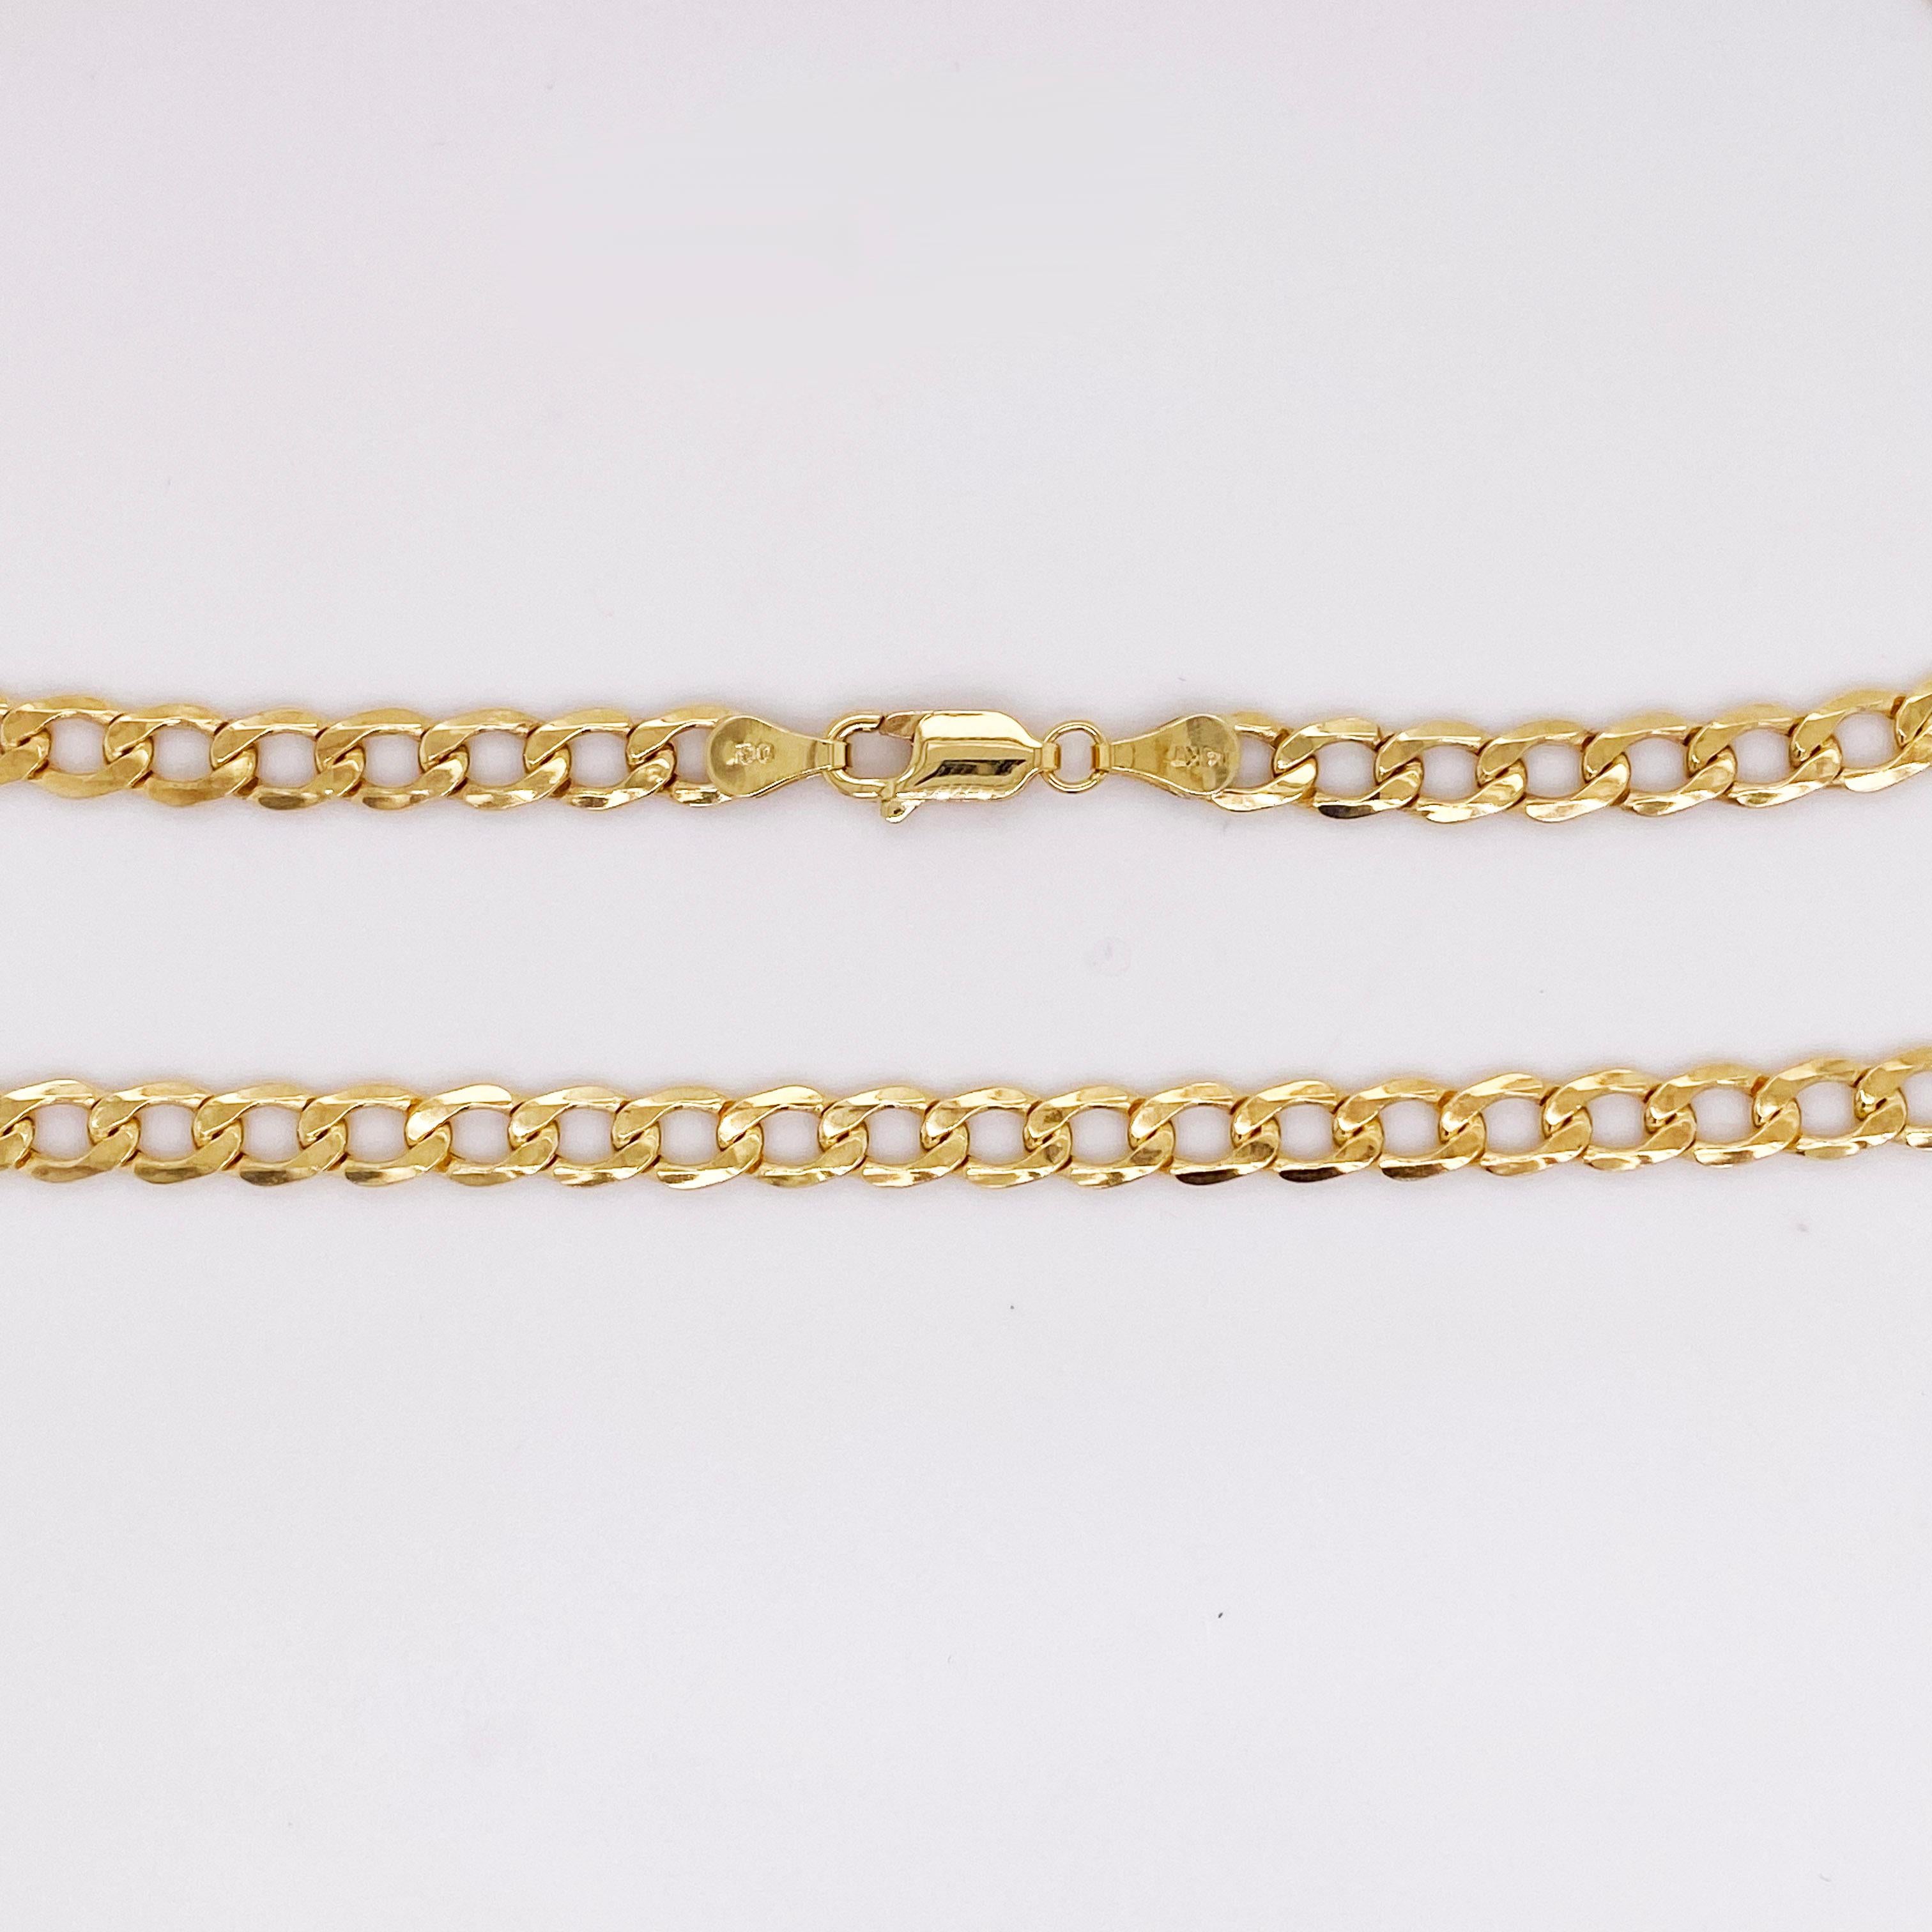 Miami Cuban chain, or Curb chain, necklace made in 14k yellow gold. This necklace is the hottest chain necklace in today's fashion! Big, gold jewelry is back and better than ever! Add this chain to your fine jewelry collection as your signature